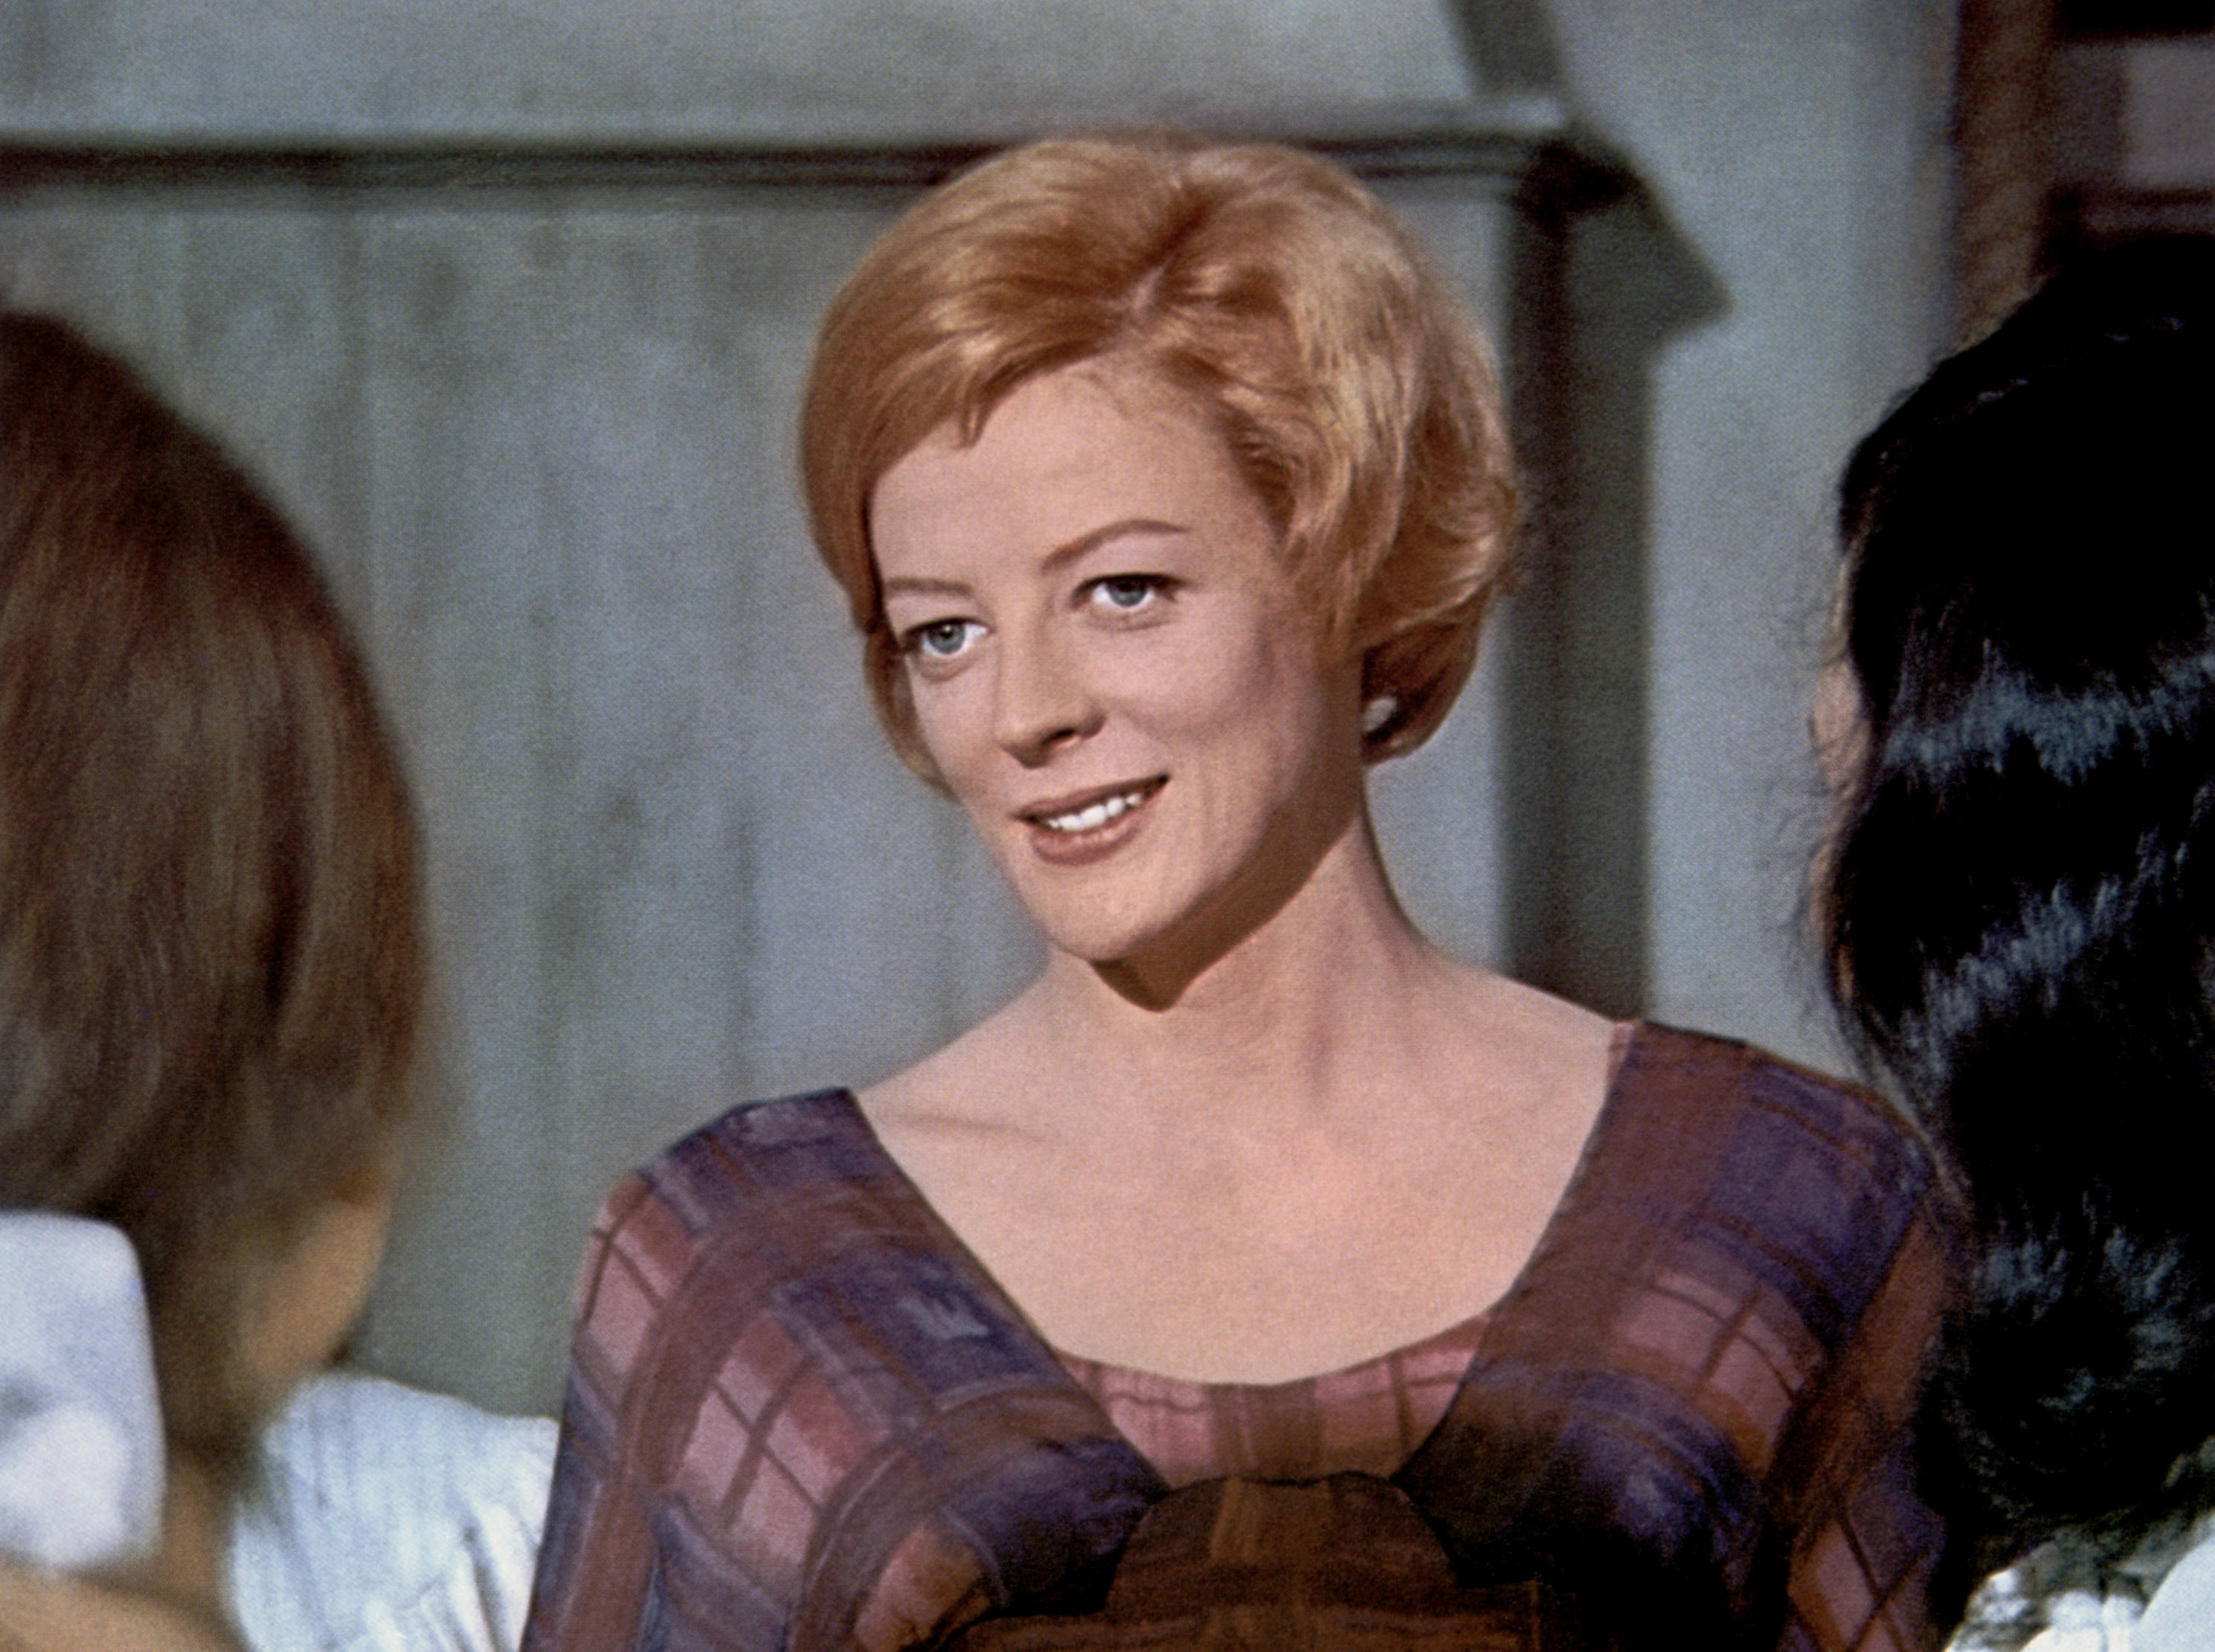 Maggie Smith in the &quot;Prime of Miss Jean Brodie.&quot; She is speaking to two woman and wearing a checkered dress.